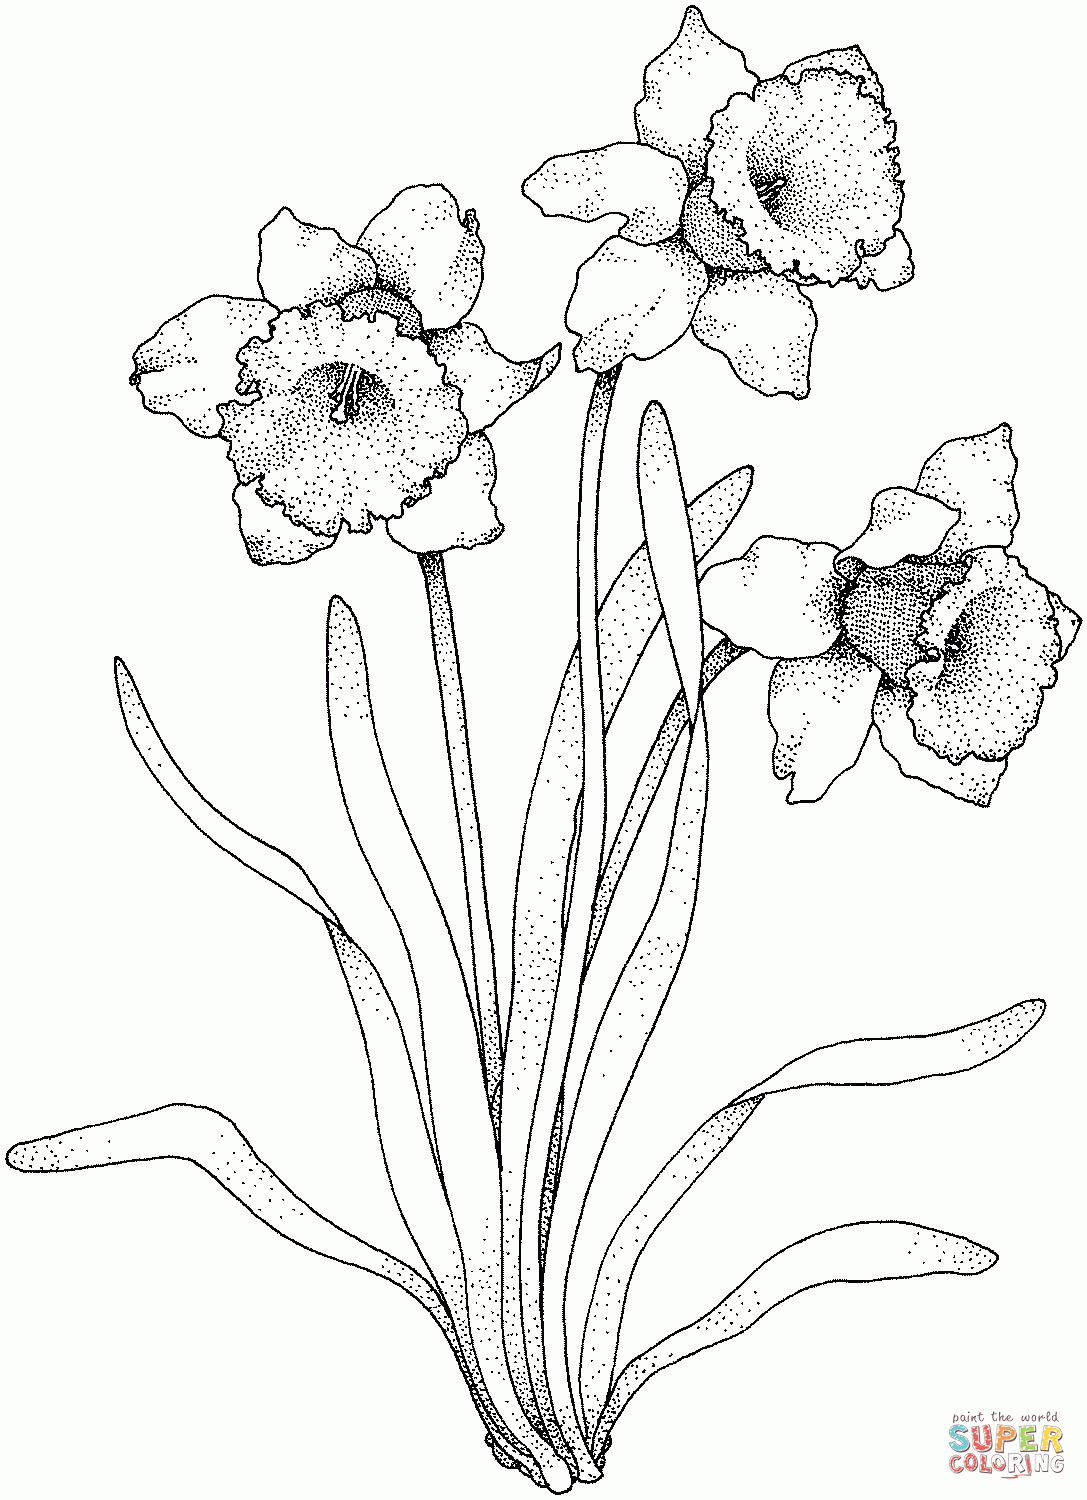 Daffodil Coloring Pages | Free Coloring Pages - Free Printable Pictures Of Daffodils